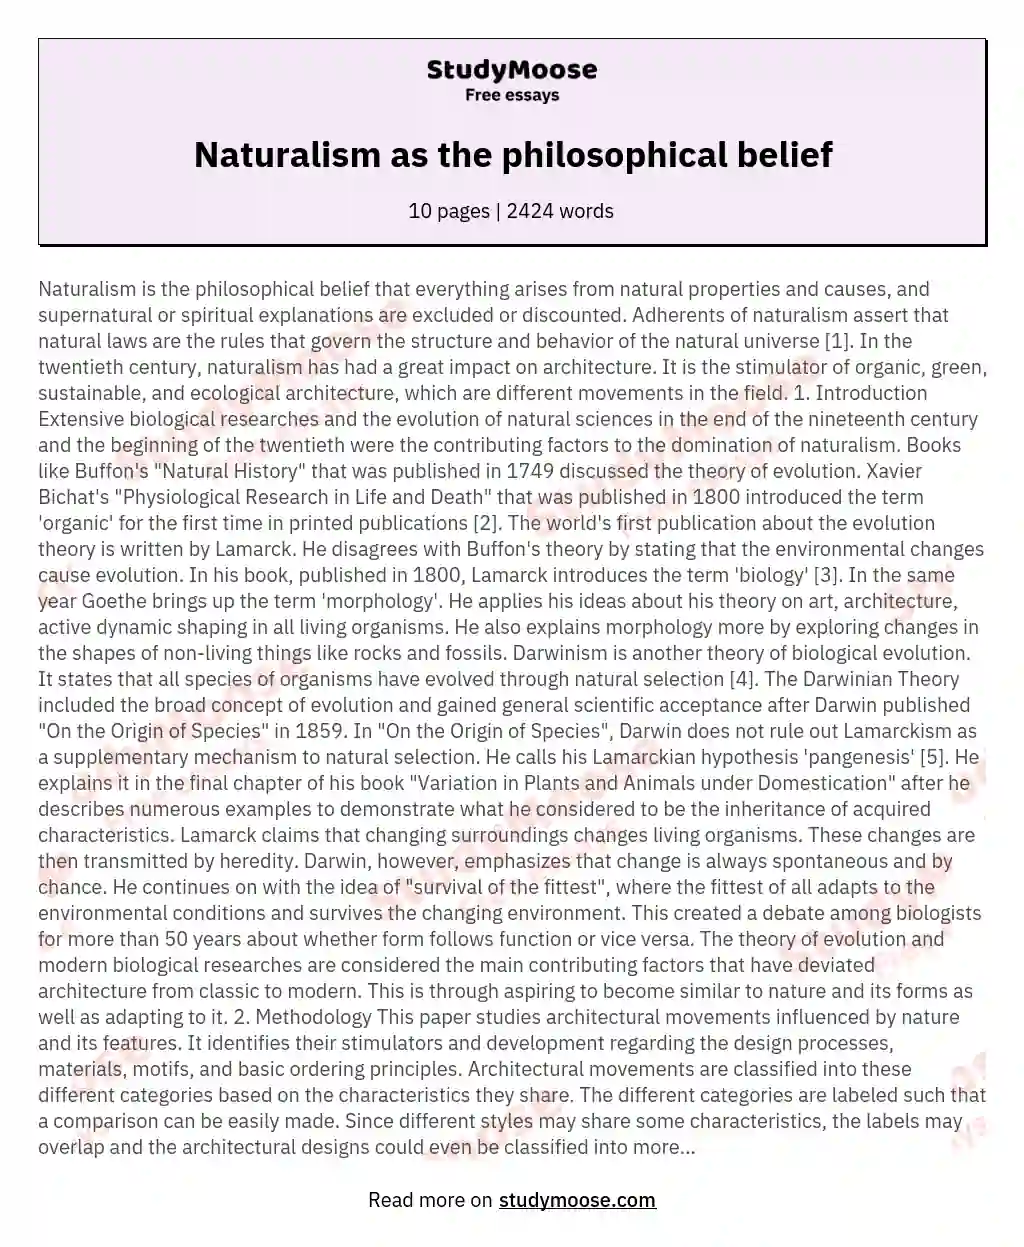 Naturalism as the philosophical belief essay